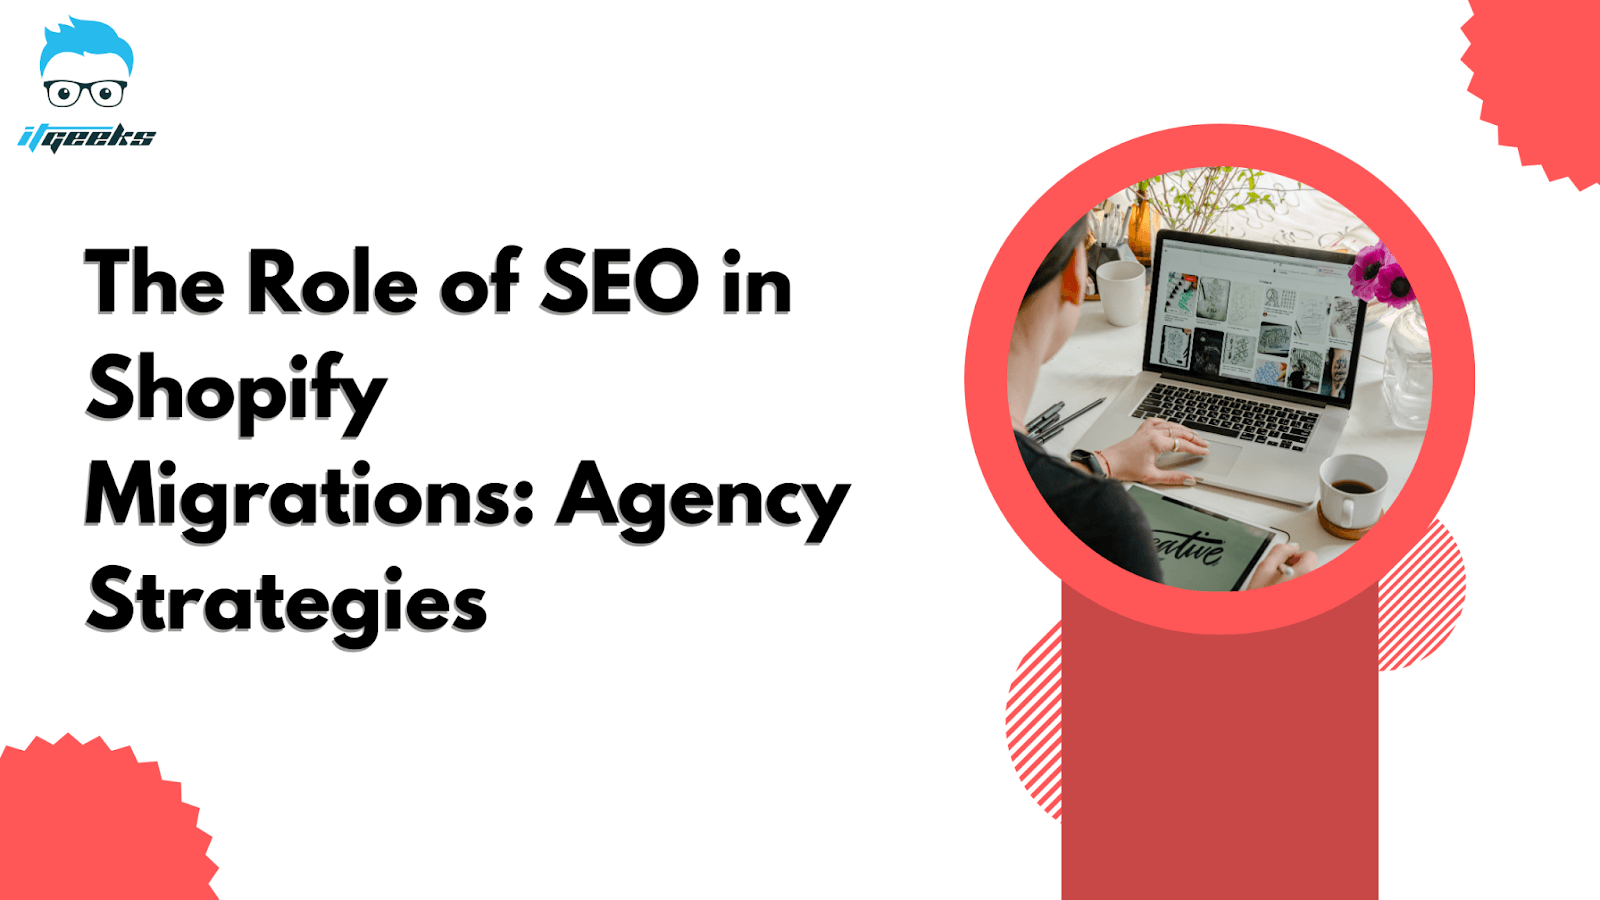 The Role of SEO in Shopify Migrations: Agency Strategies